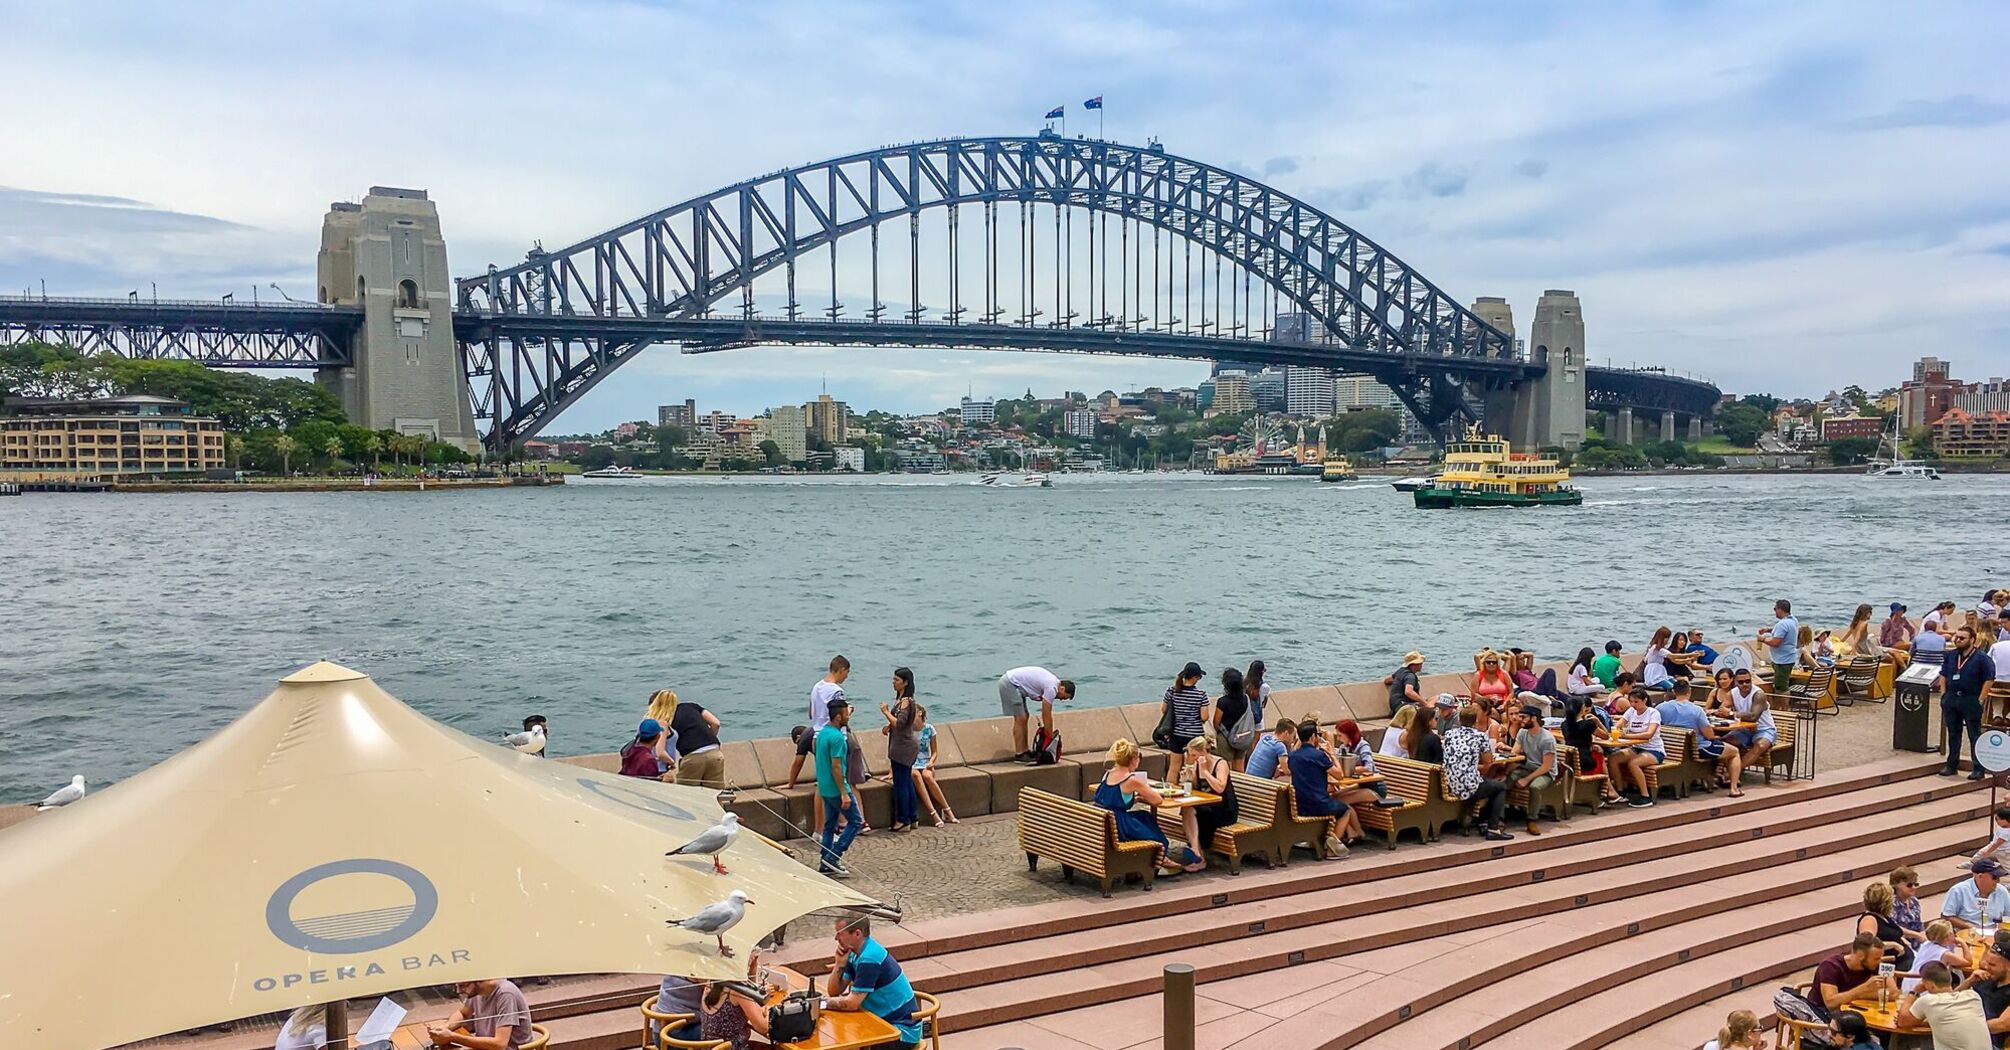 Rich history and incredible scenery: reasons to visit the Sydney Harbour Bridge